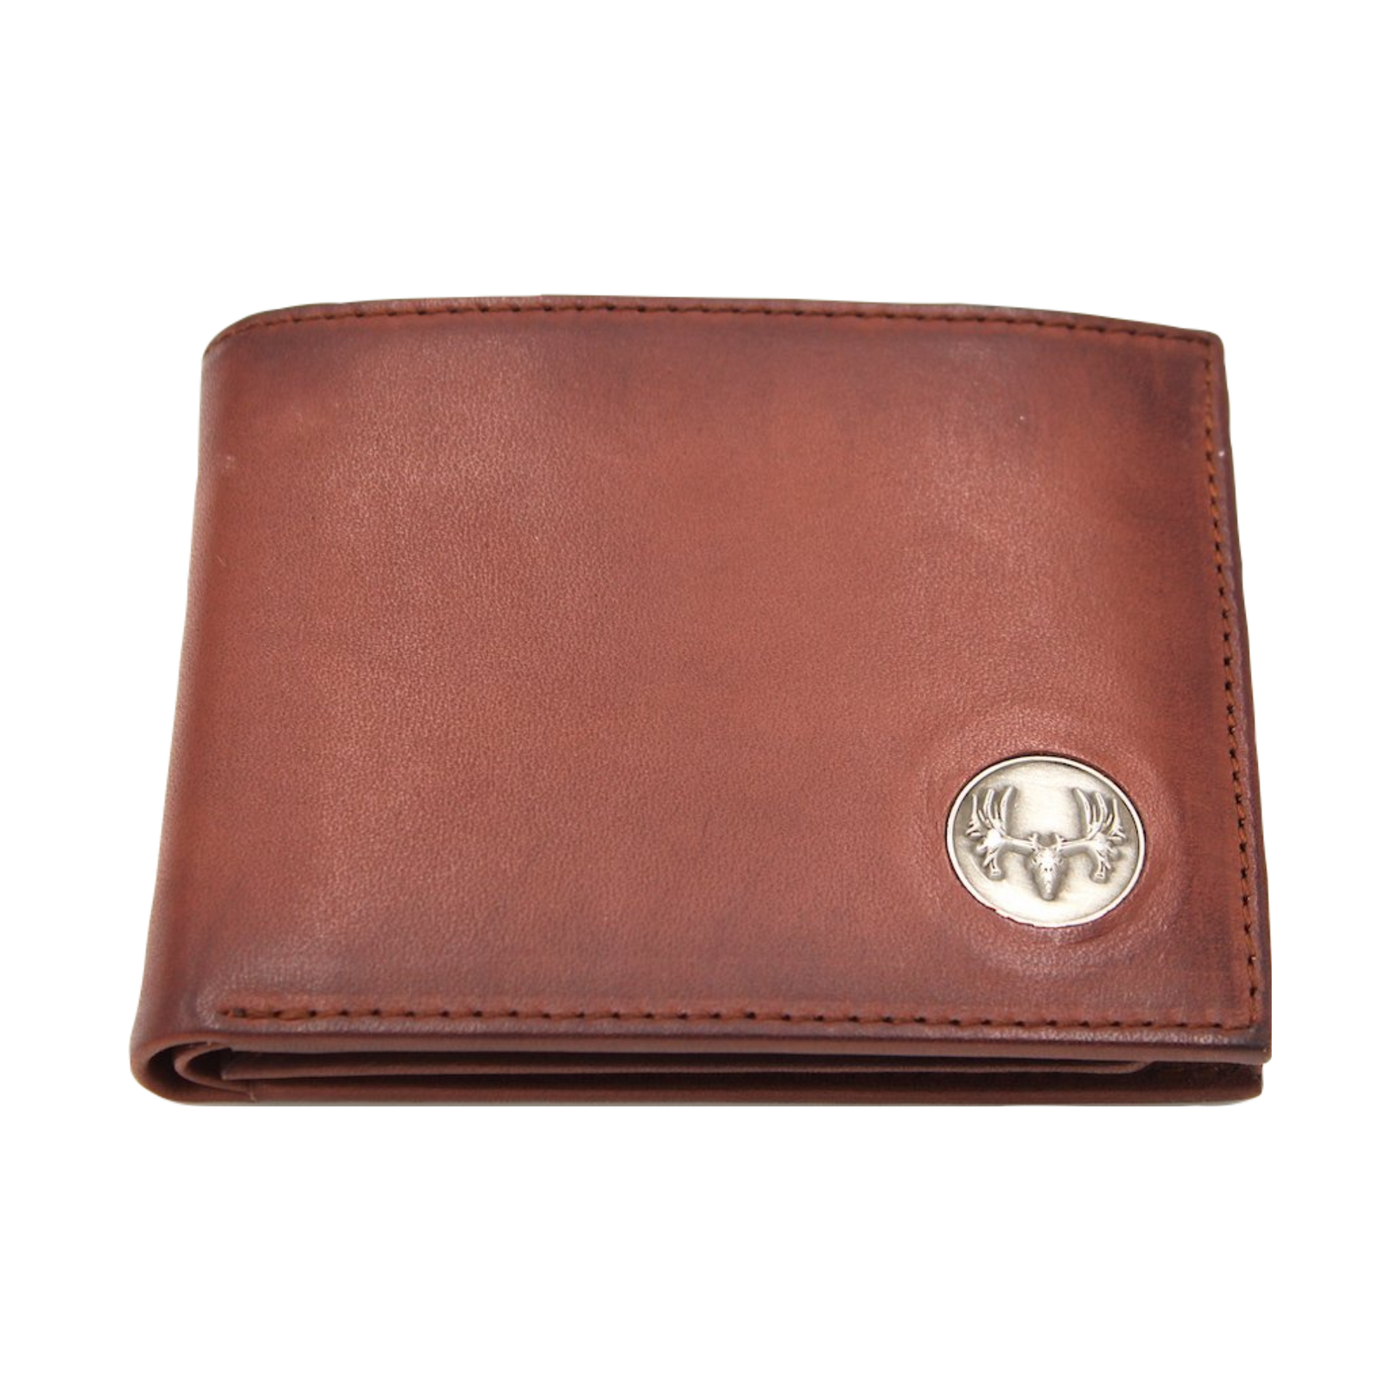 What hunter wouldn't enjoy the Wildlife Bifold European Mount Wallet for their collection? This piece is classic in style with its hand-burnished, rich full grain leather and the European mount concho. Ensure to get yours today! 8 Card Slots 3 Storage Pockets 2 ID Windows Leather Tipped Bill Compartment Dimensions: 4.5"L x 3.5"H RFID Protection Color: Caramel